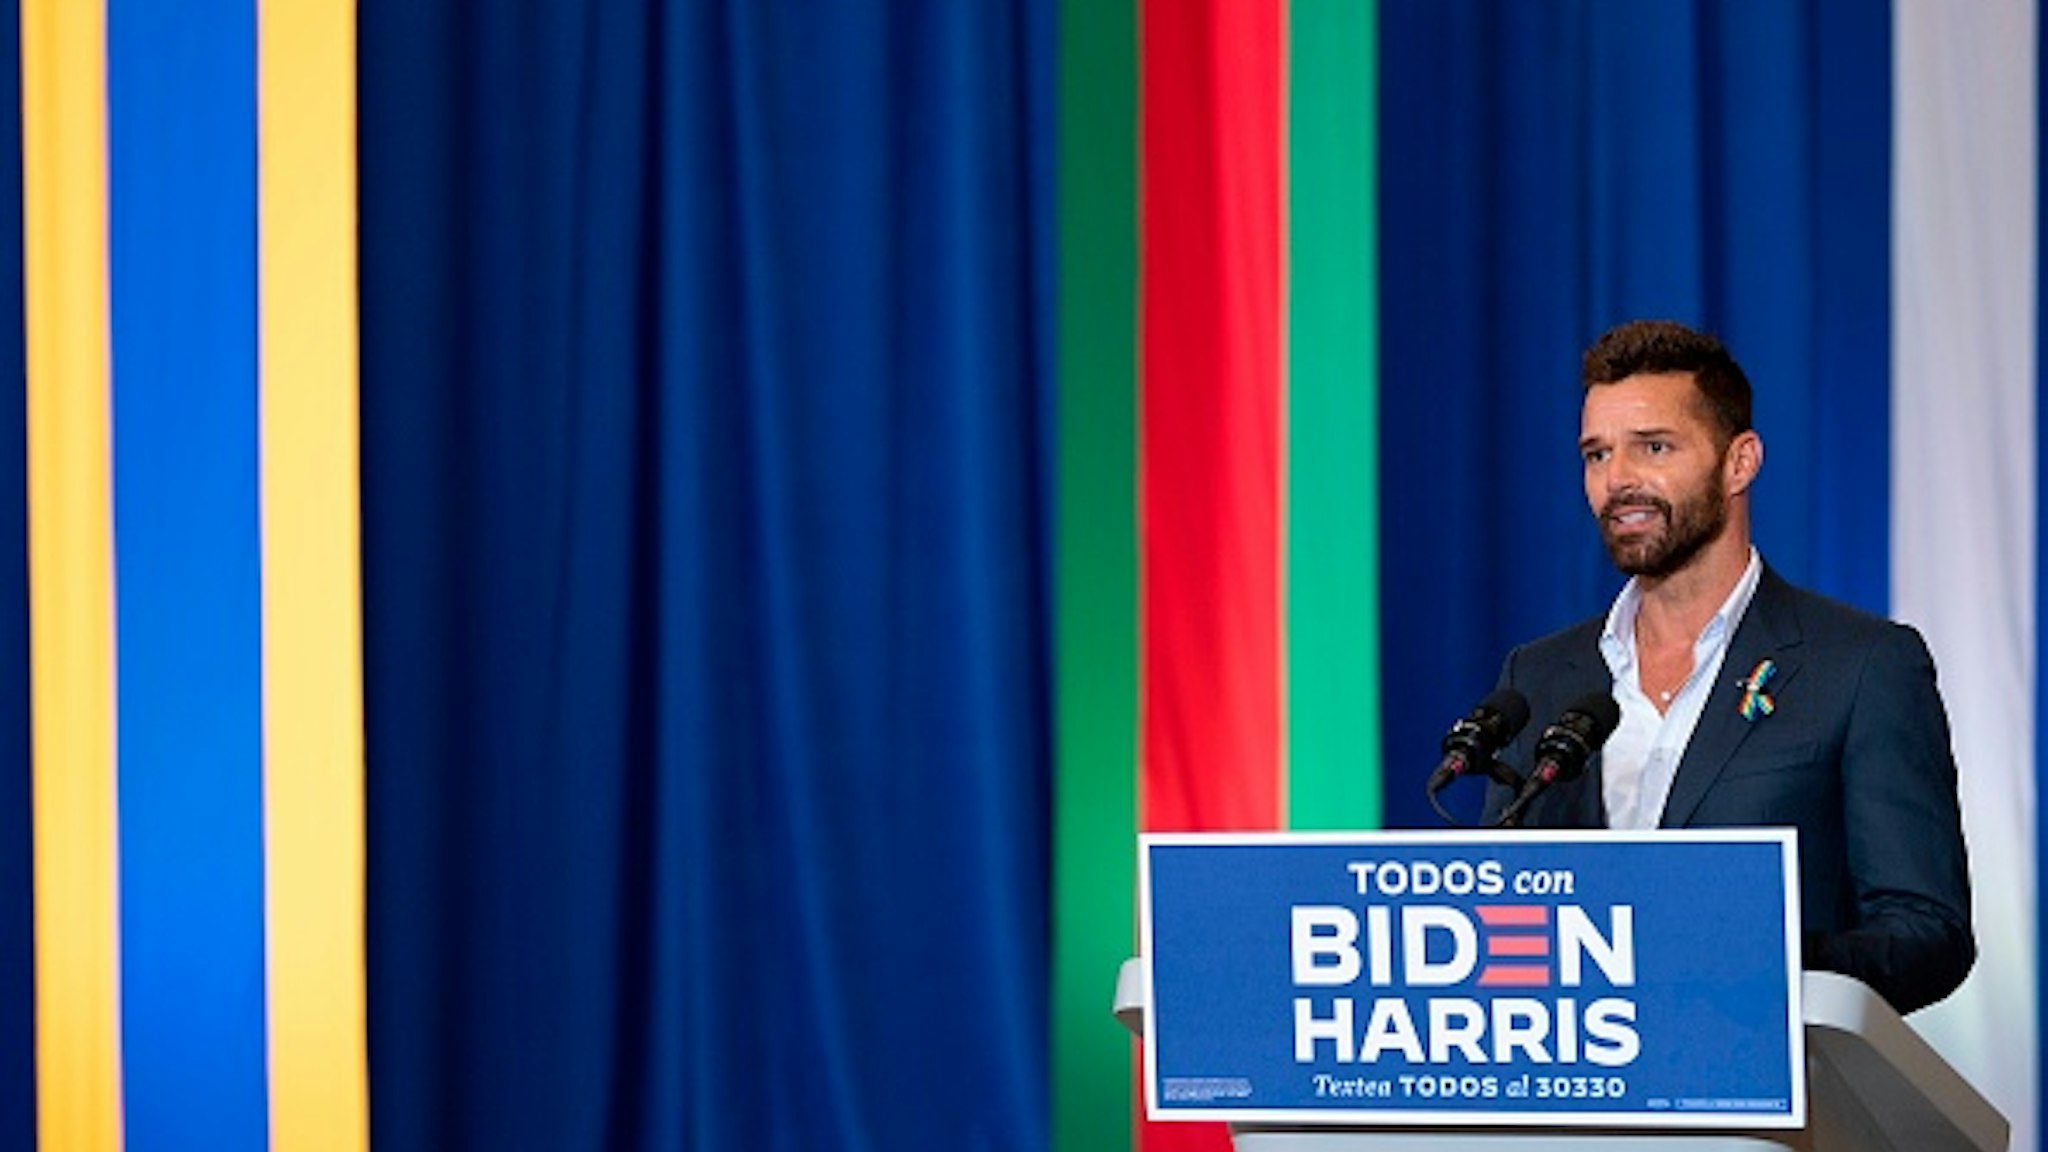 Ricky Martin, a Puerto Rican singer, songwriter, and humanitarian, speaks before Democratic Presidential Candidate Joe Biden as they participate in a Hispanic Heritage Month event at the Osceola Heritage Park in Kissimmee, Florida on September 15, 2020.